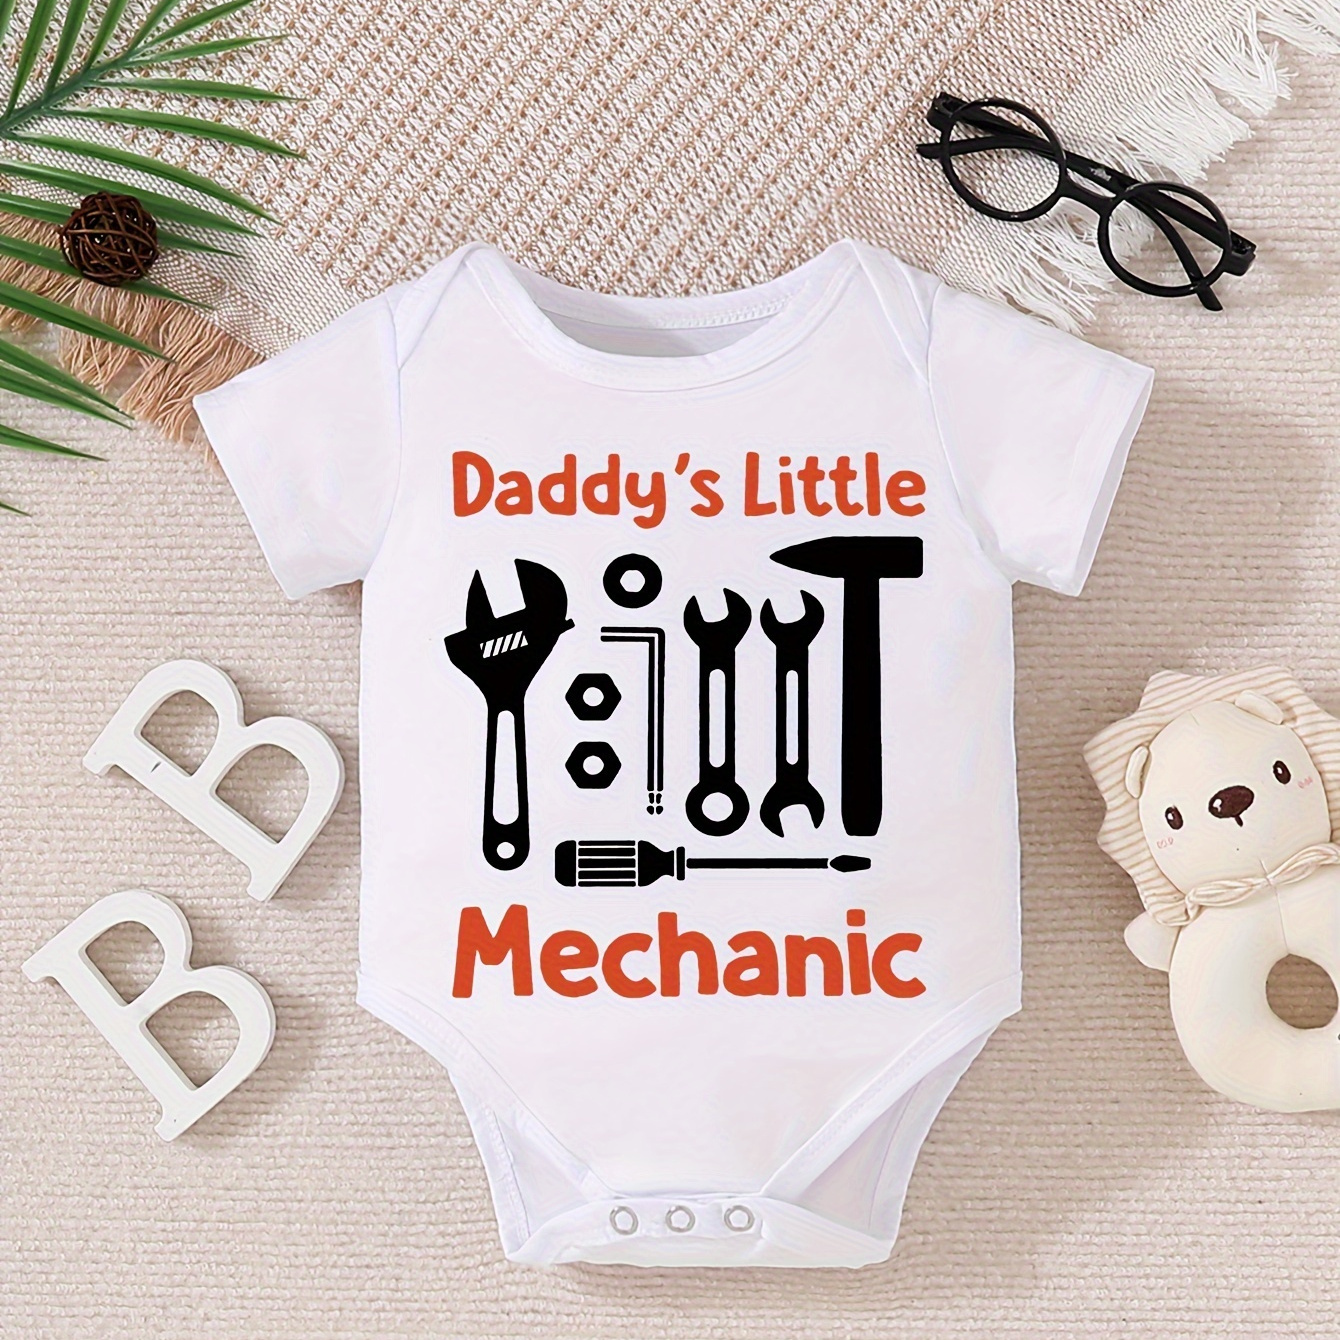 

Baby Boys Bodysuit With Snap Closure, Cute Letter Printed "daddy's Little Mechanic", Comfortable Fit For Toddler Boys